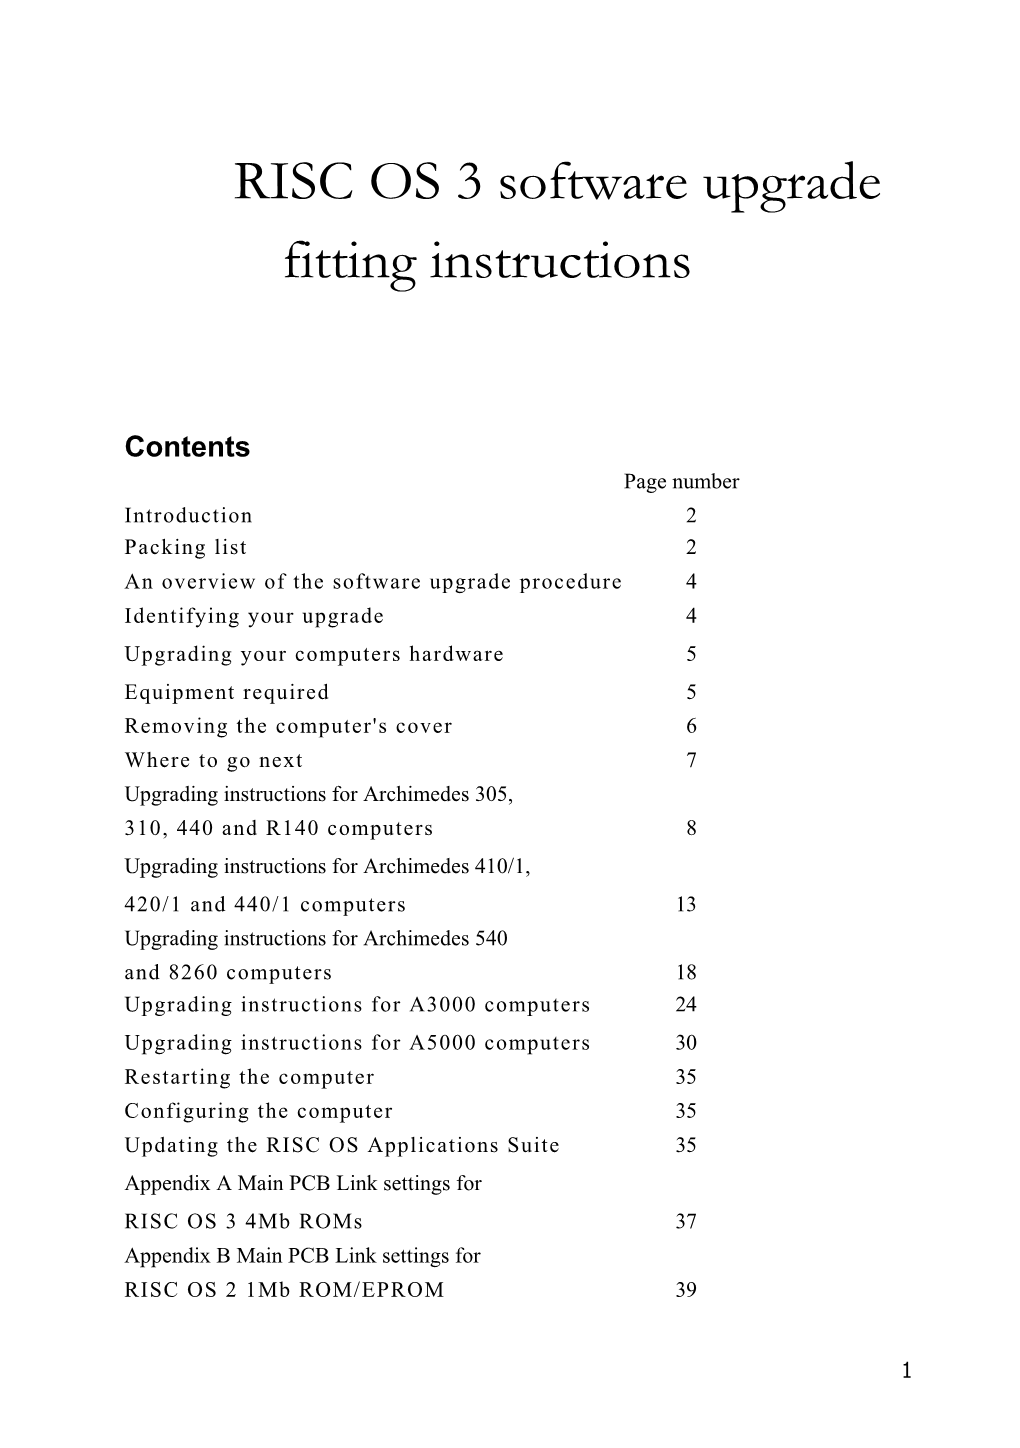 RISC OS 3 Software Upgrade Fitting Instructions